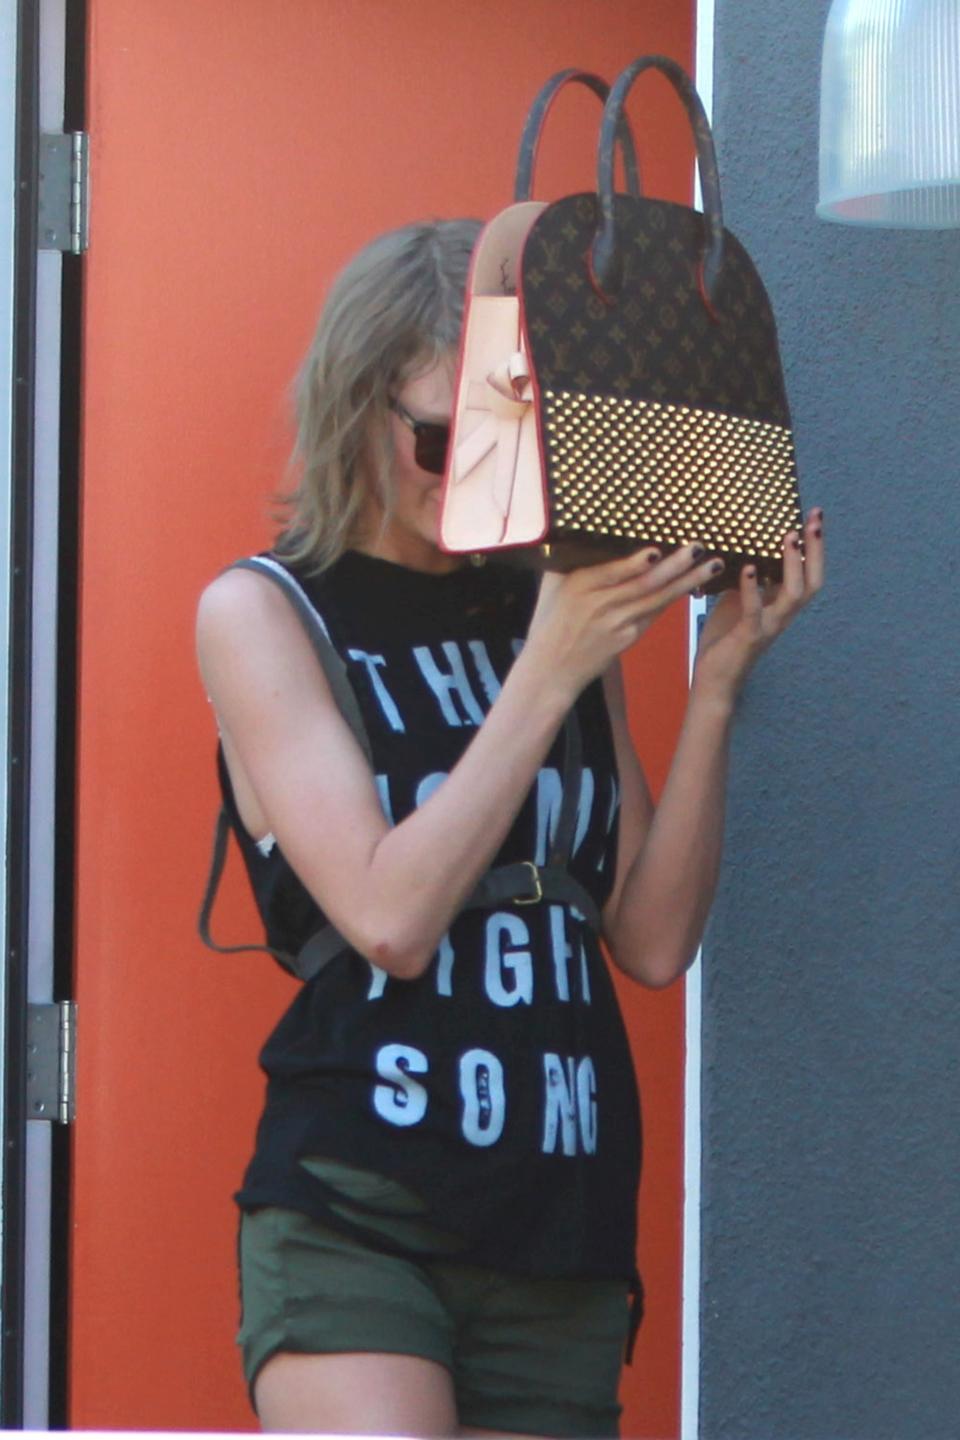 Taylor holding a Louis Vuiton bag in front of her face